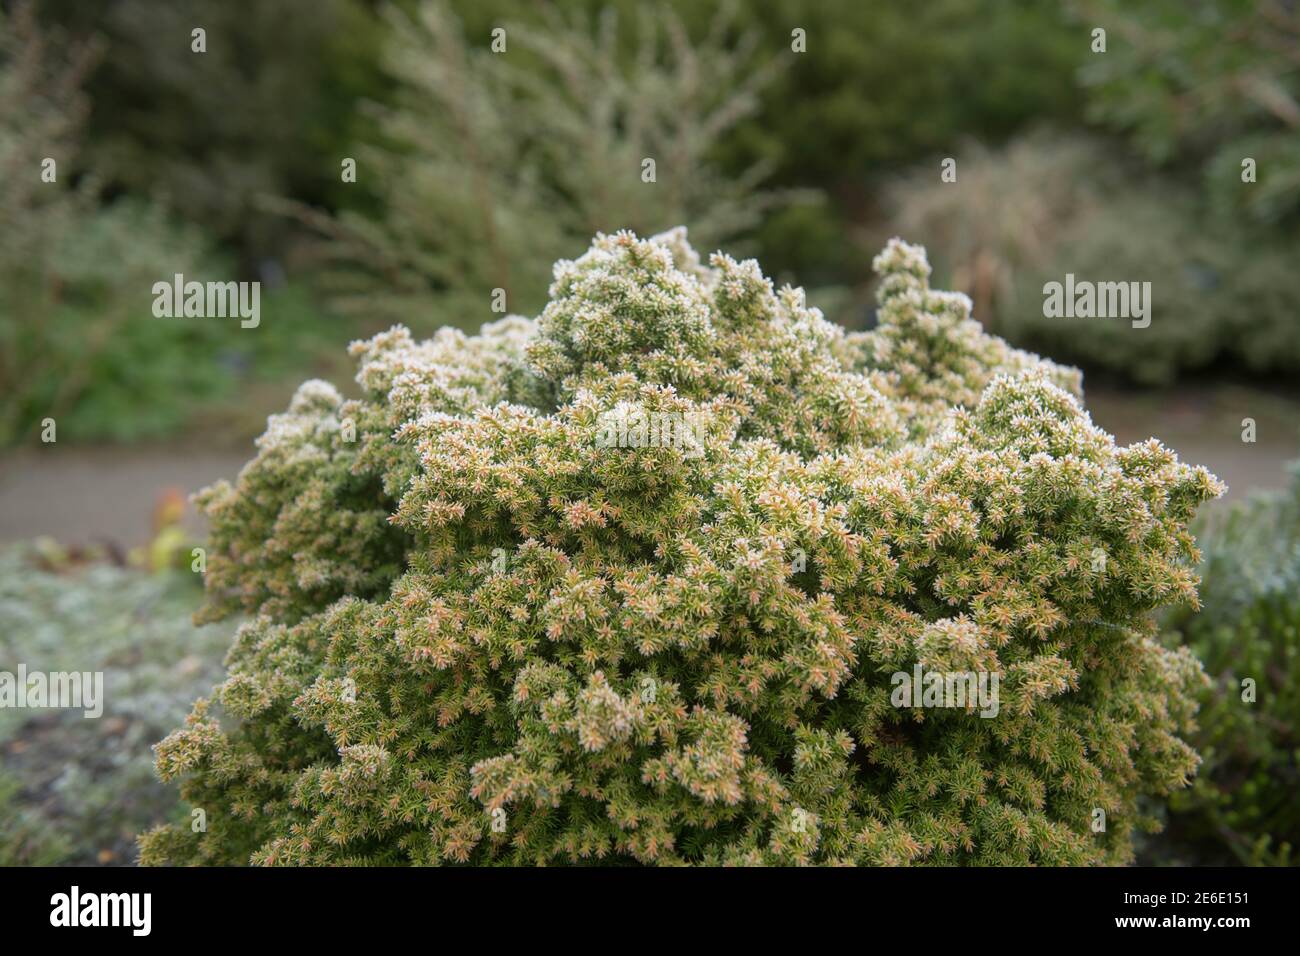 Winter Frost on the Foliage of an Evergreen Dwarf Conifer Japanese Cedar Plant (Cryptomeria japonica 'Tilford Gold) Growing in a Garden in Rural Devon Stock Photo